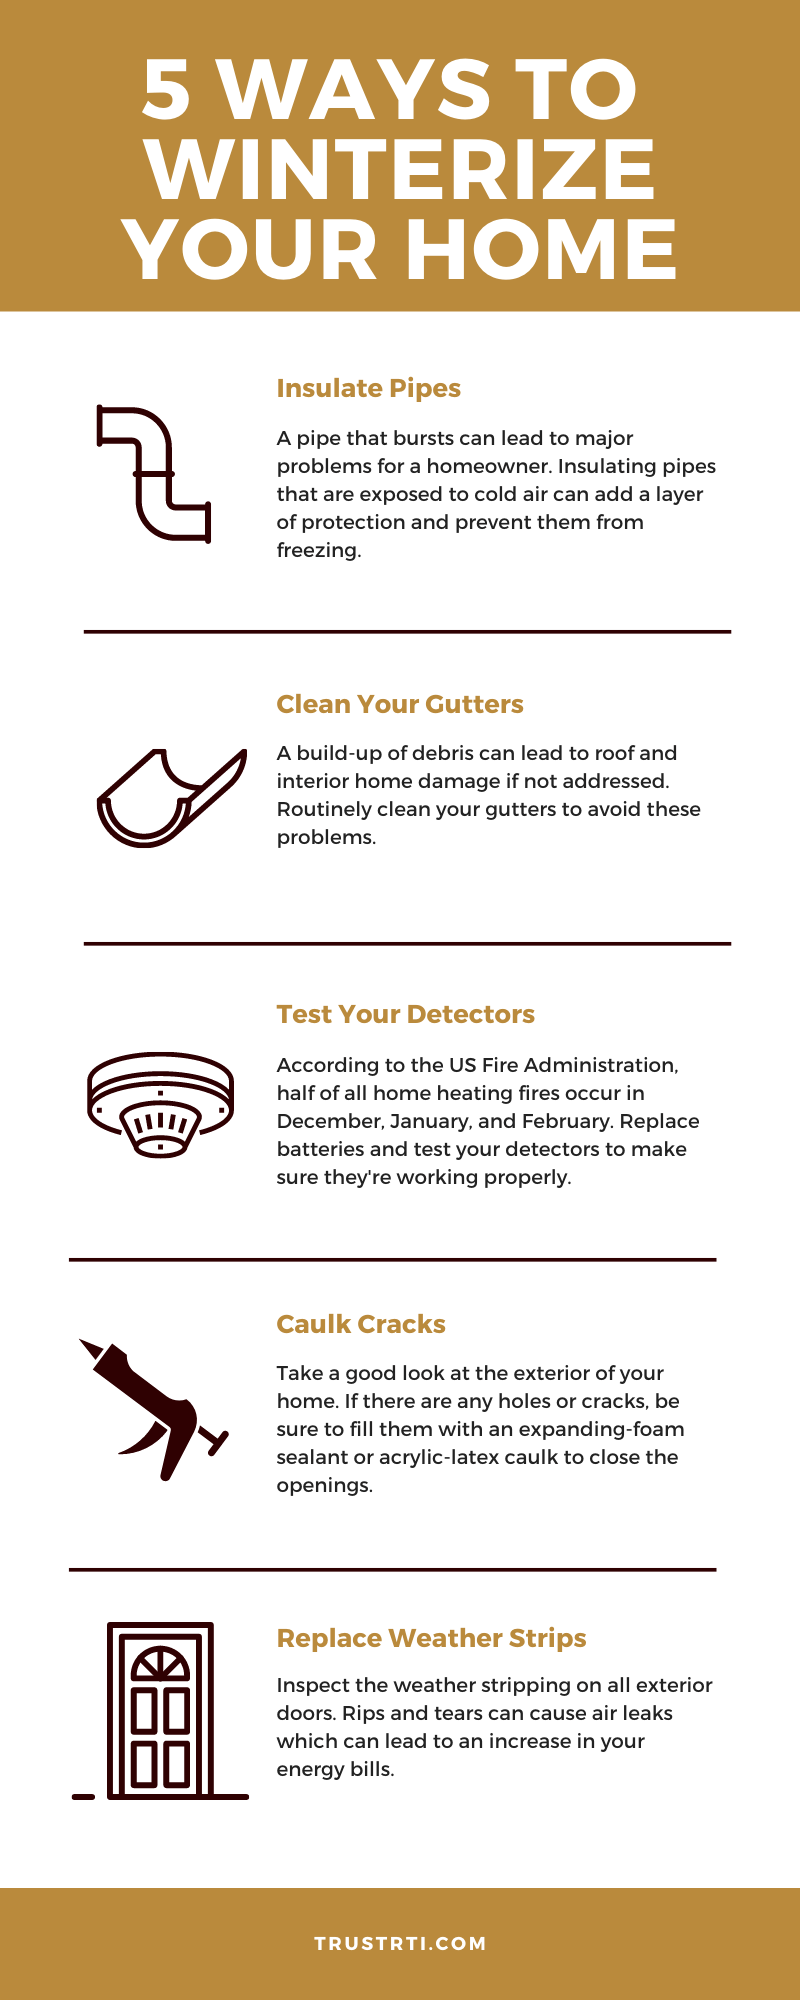 5 Ways to Winterize Your Home - RTI Insurance Services Infographic